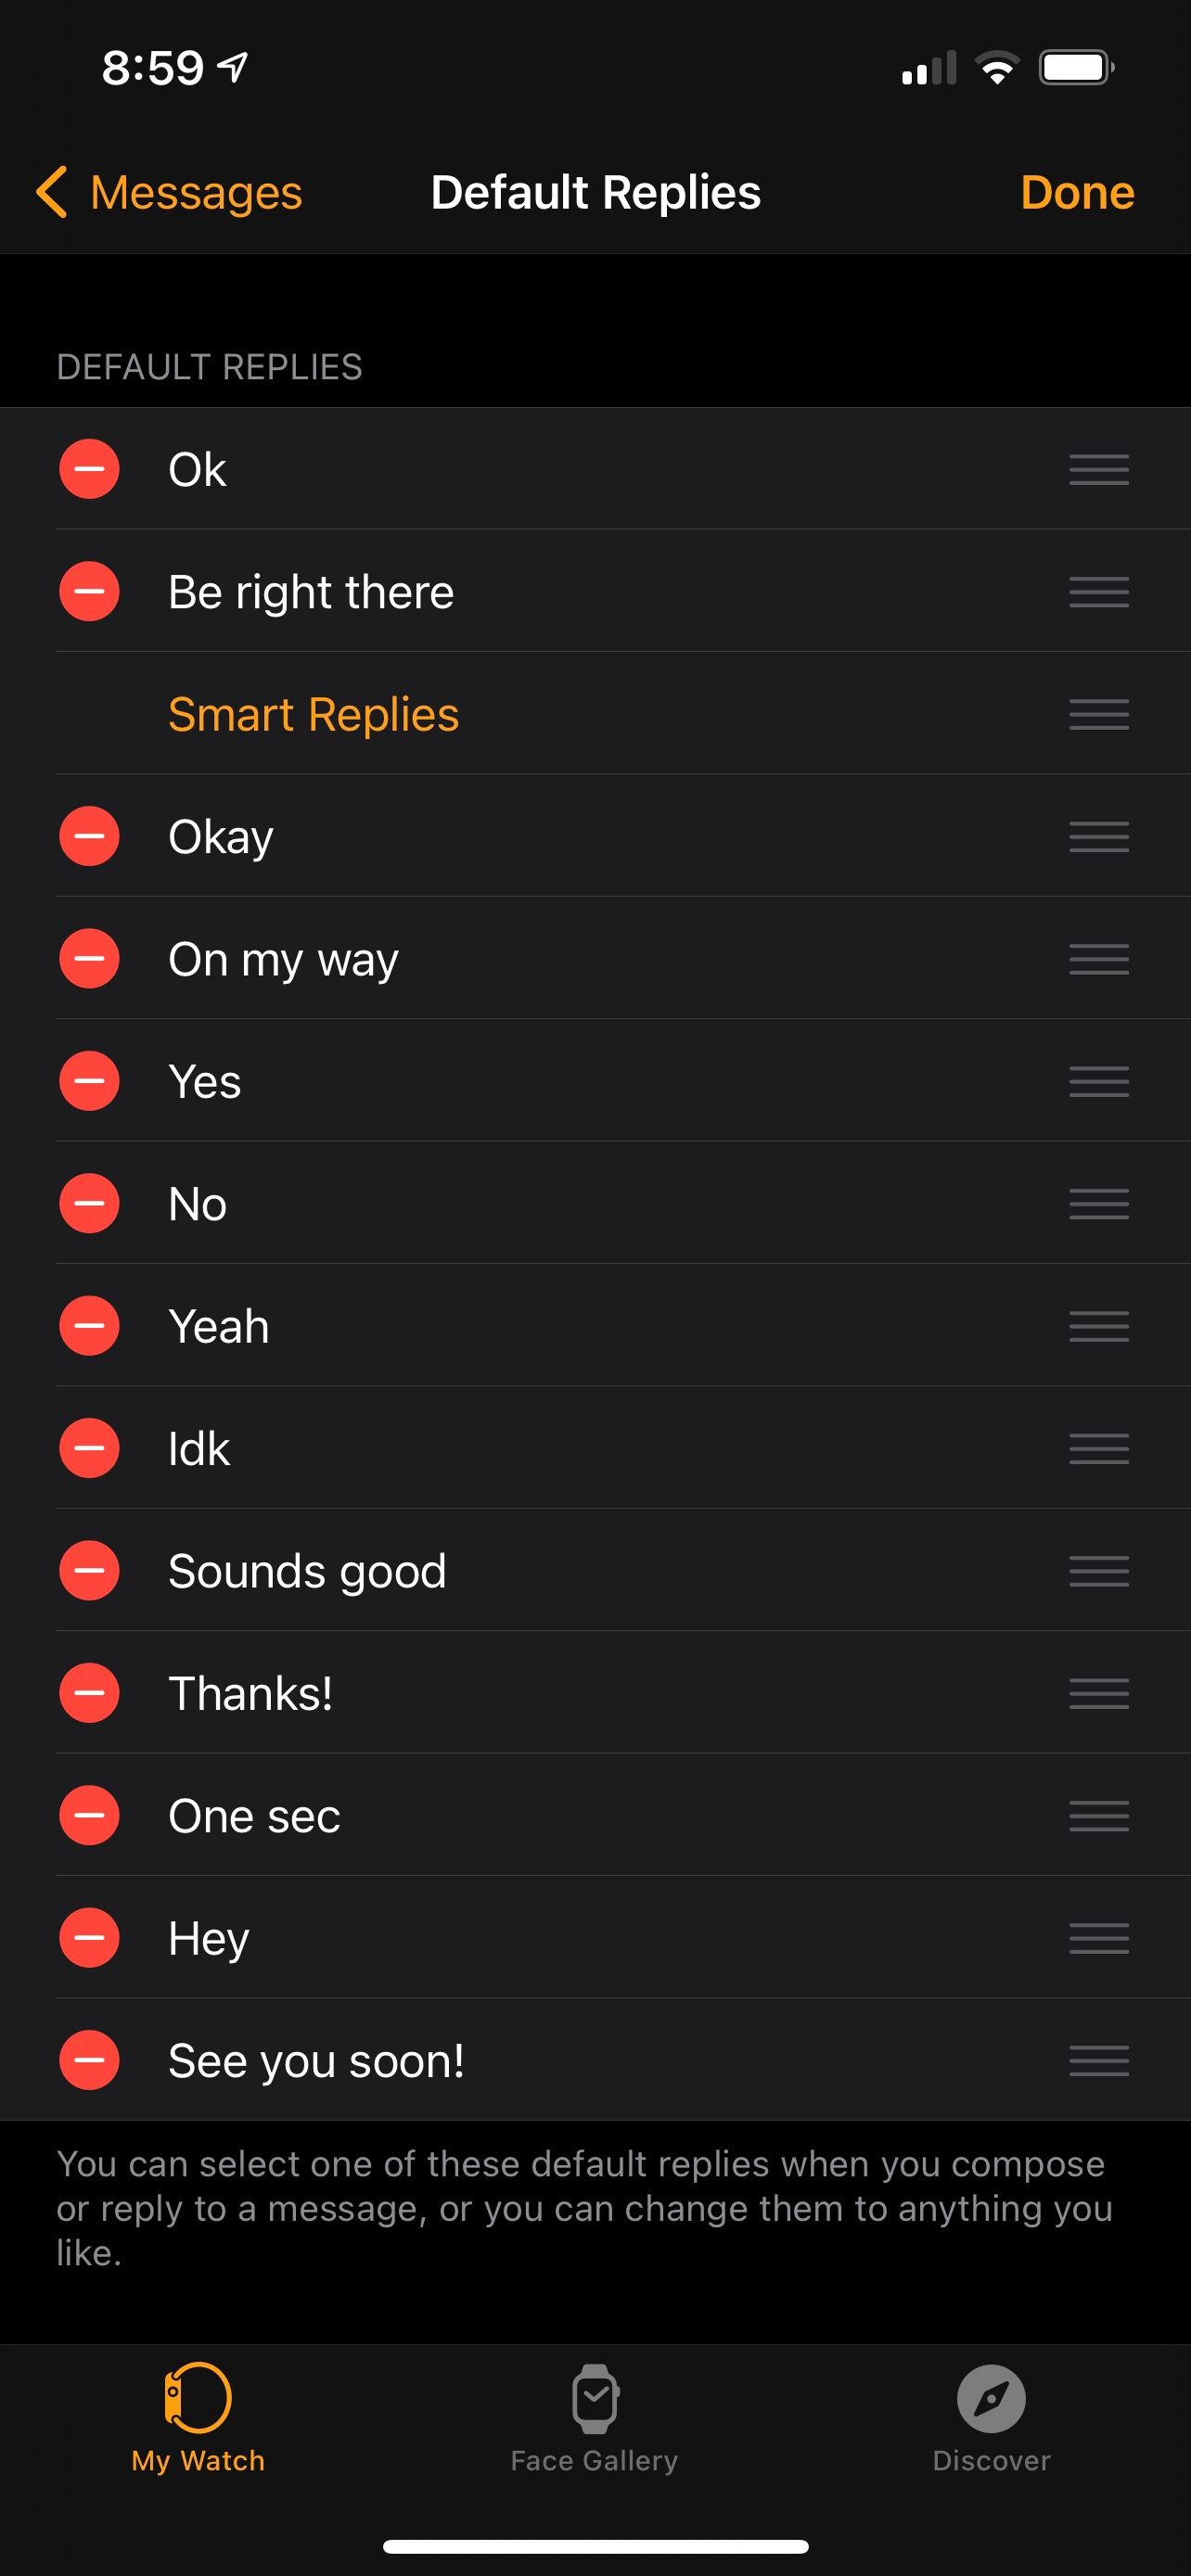 Smart Replies moved down in list of options